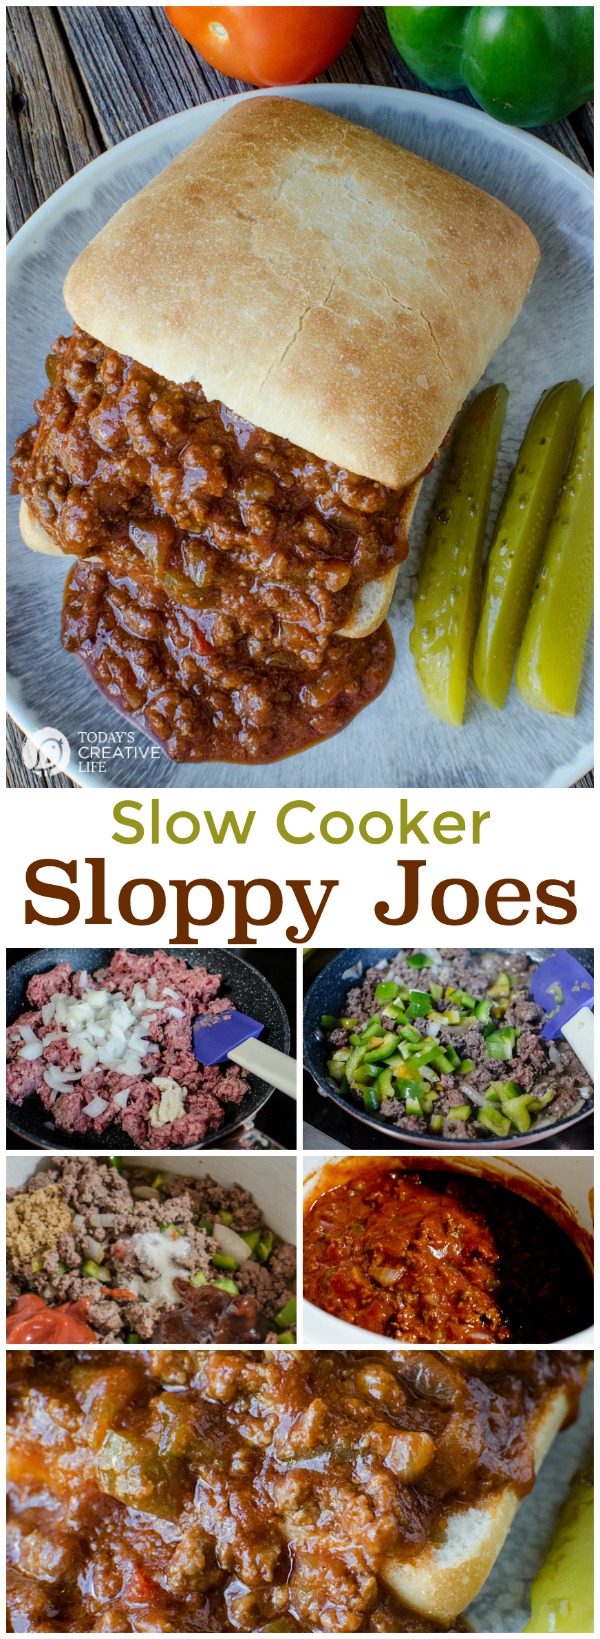 Slow Cooker Sloppy Joes photo collage